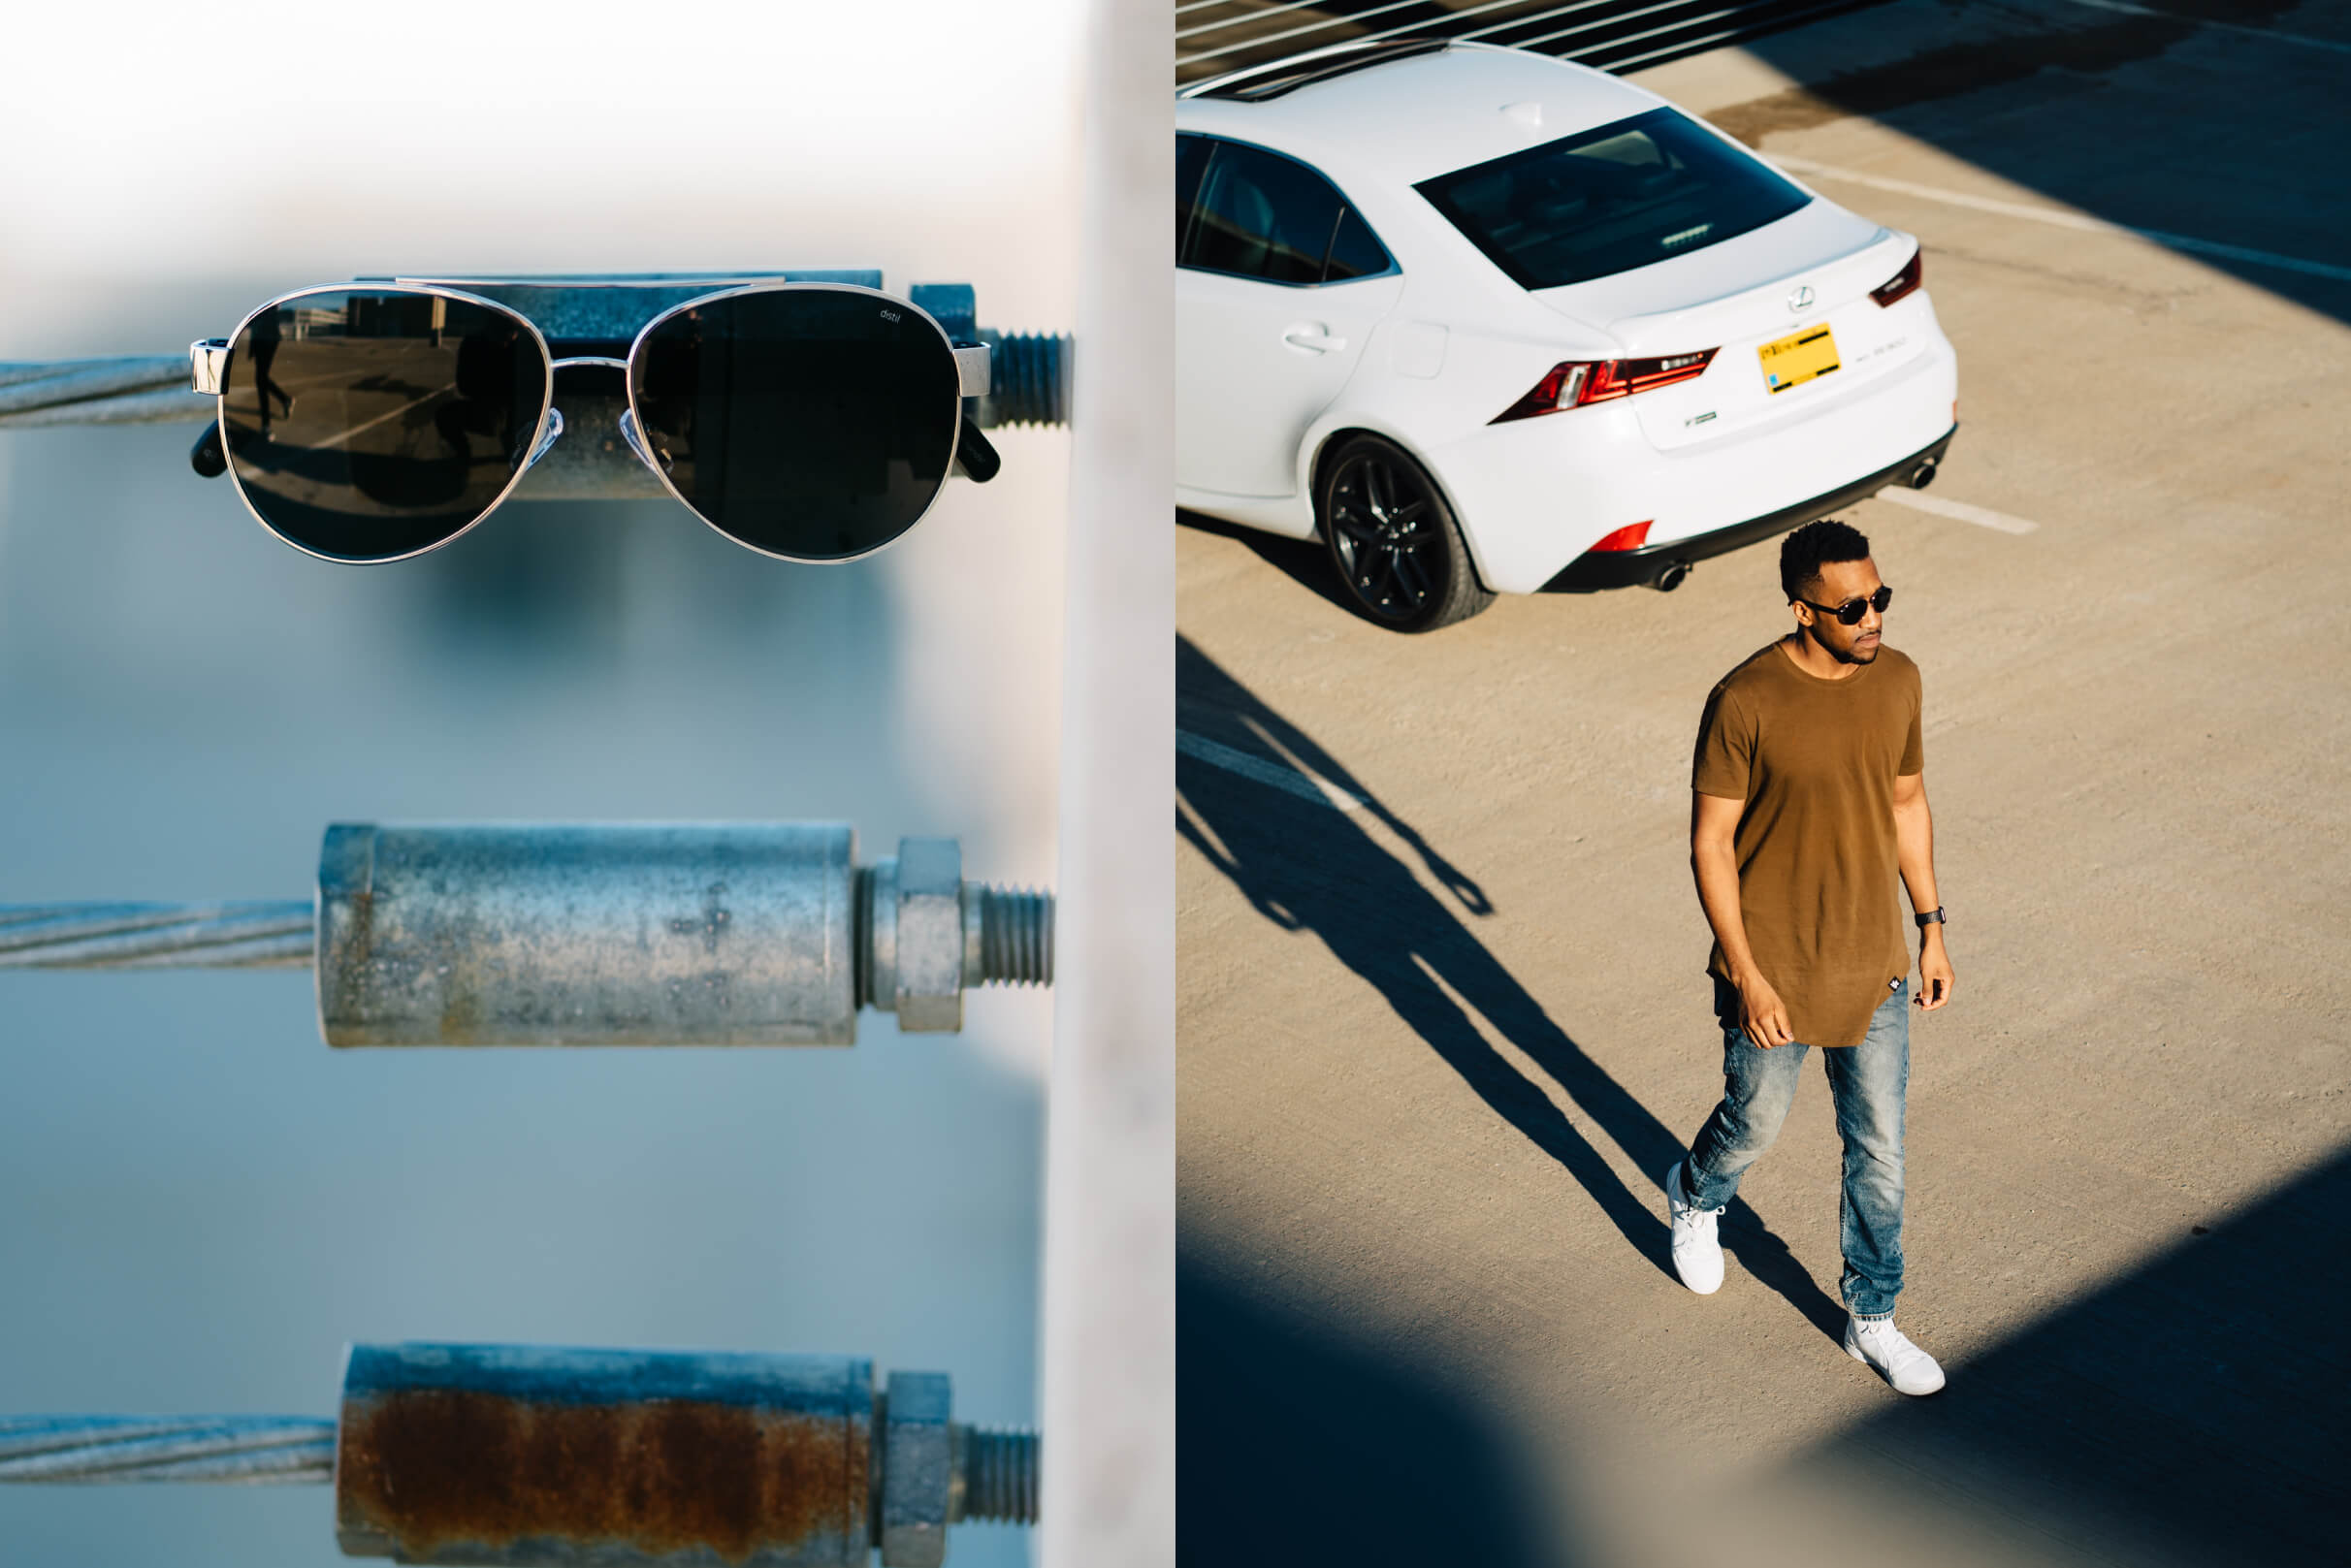 Two photos of Maverick titanium aviator sunglasses, one magnetically attached to metal, the other a man walking away from a sports car wearing the sunglasses